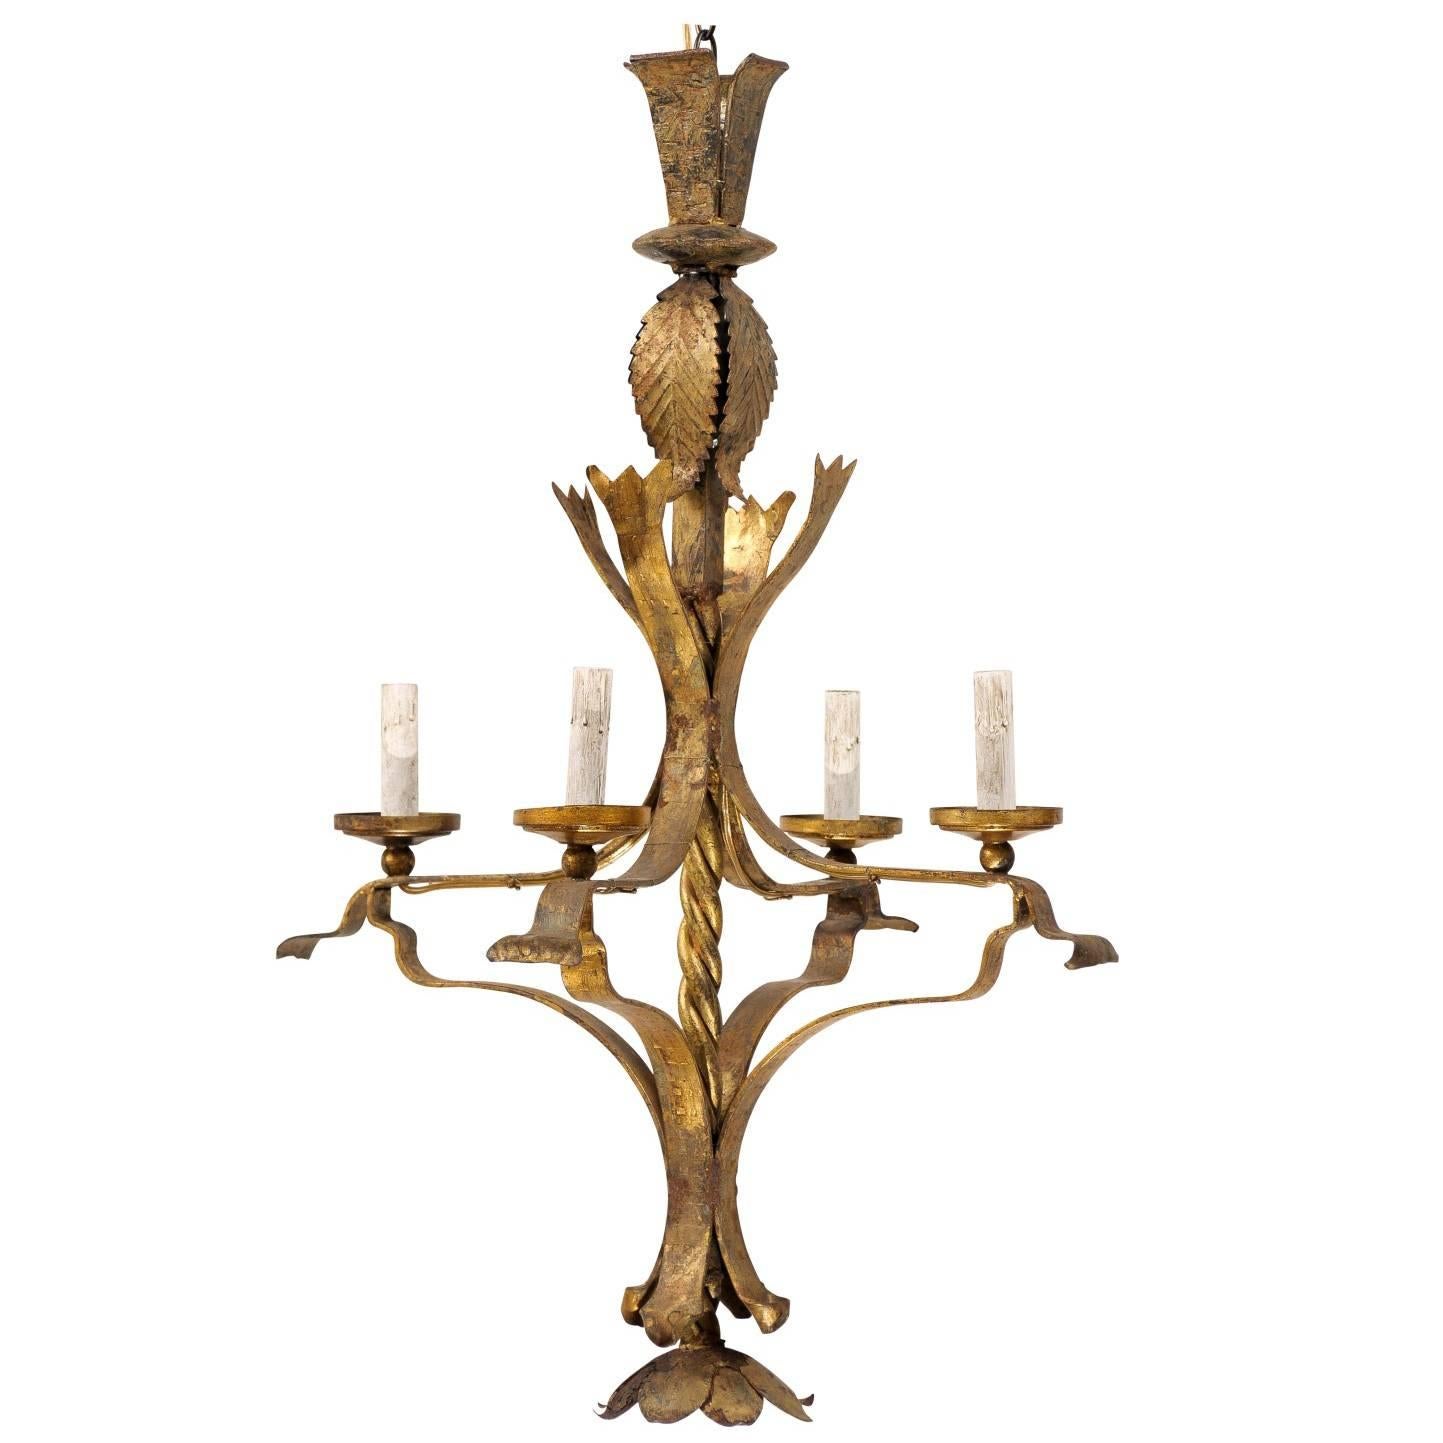 A French Vintage Gilt Iron Four-Light Chandelier with Floral Motif Finial